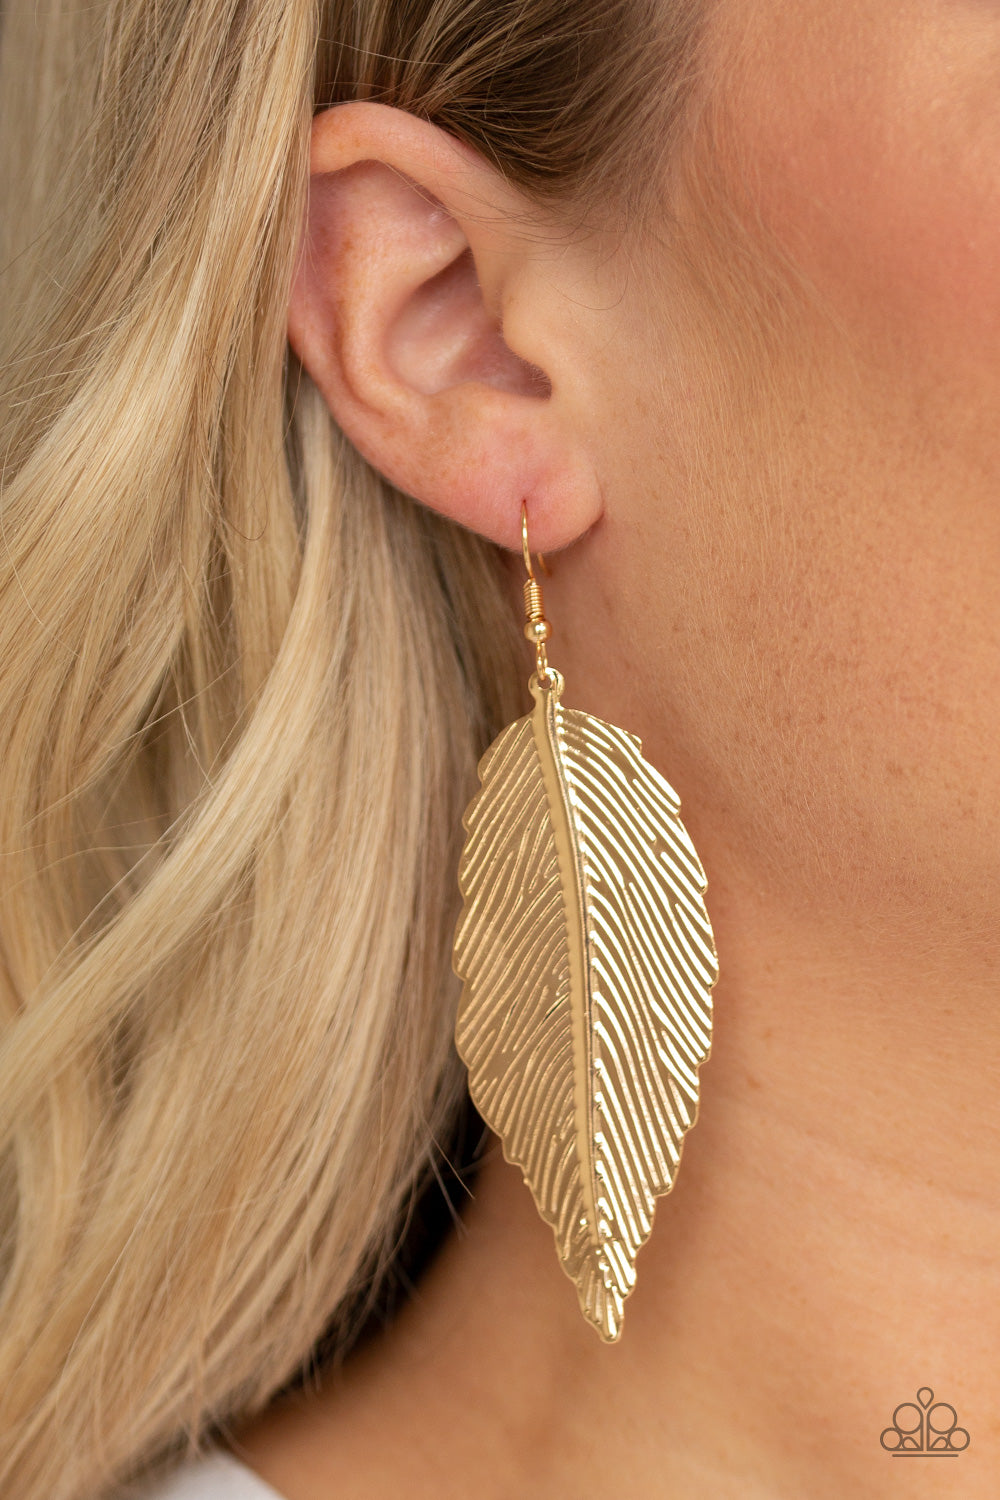 LOOKIN FOR A FLIGHT - GOLD FEATHER TEXTURE EARRINGS